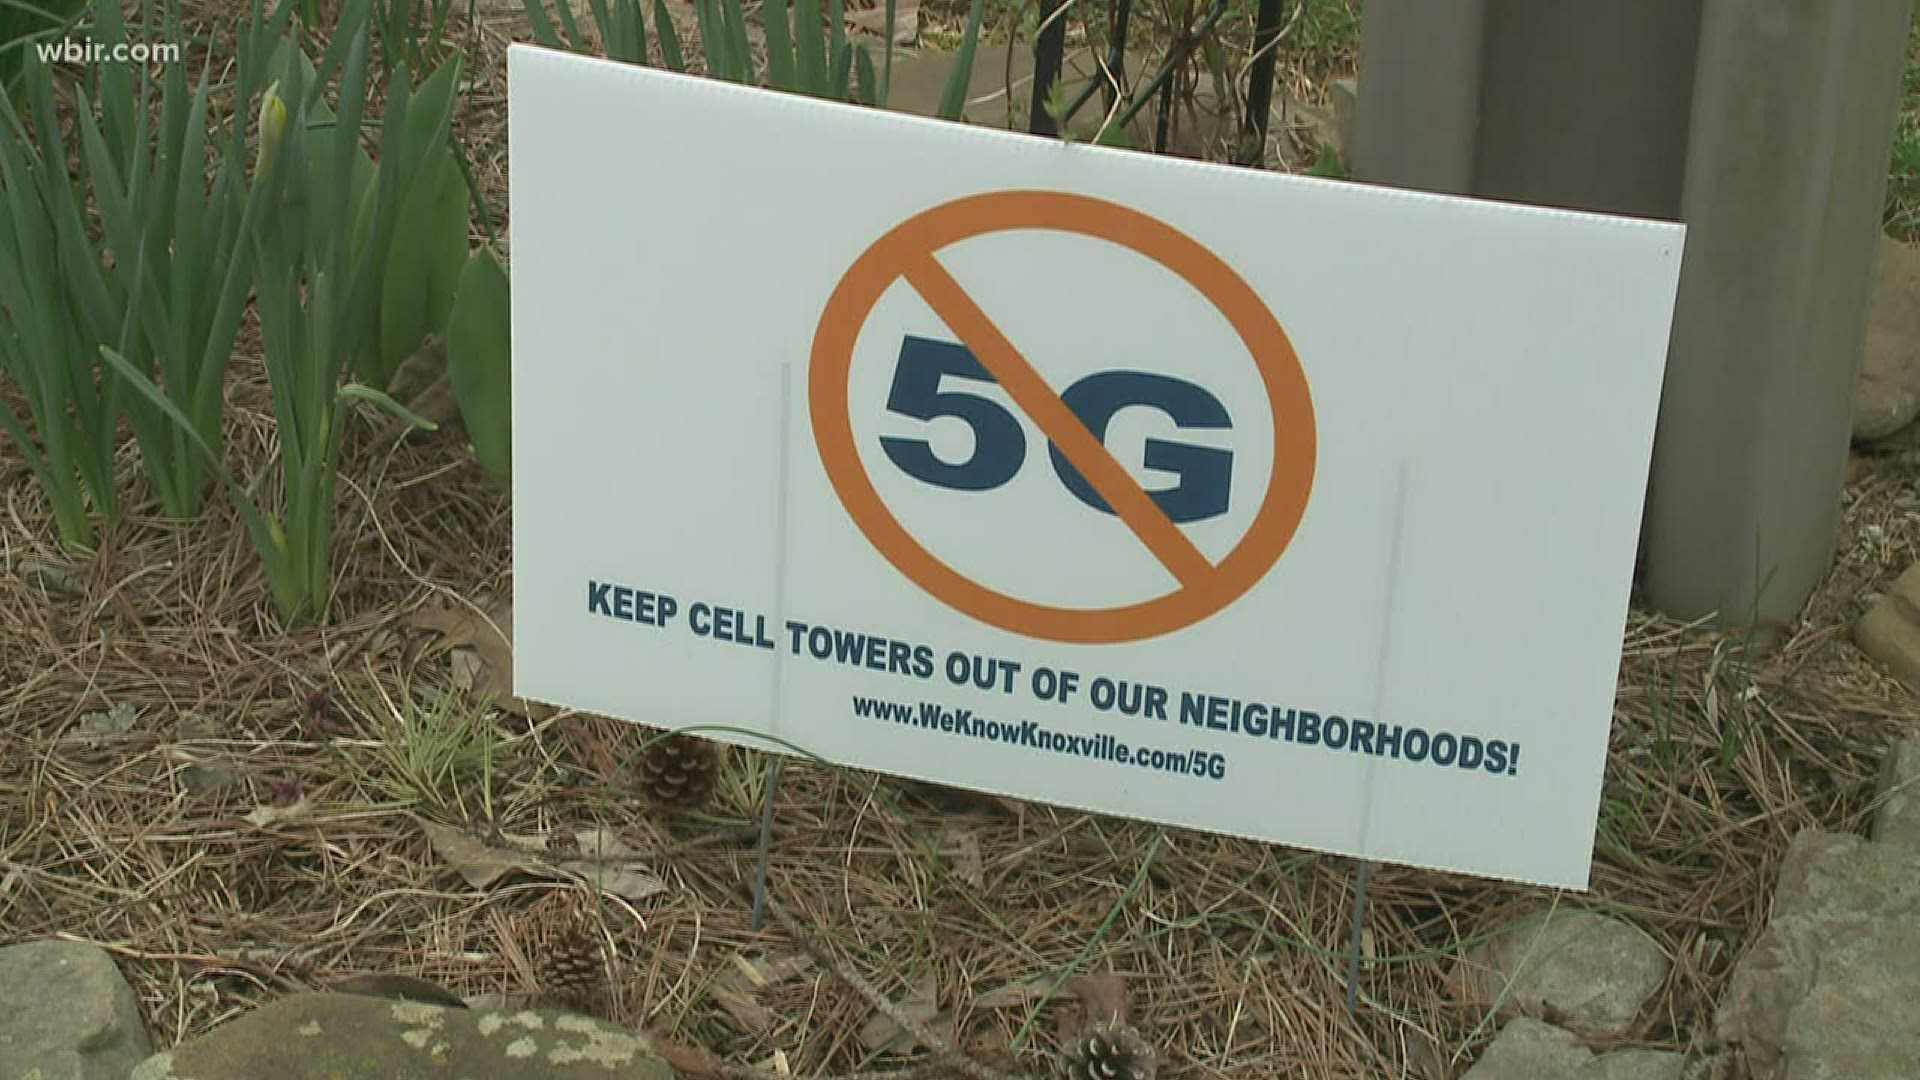 Farragut is now calling for the state and federal governments to halt the construction of 5G towers there.